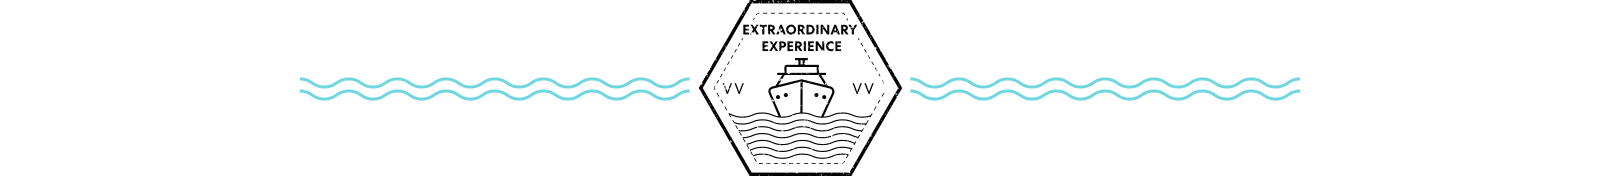 EXTRAORDINARY EXPERIENCES DIVIDER with image of VV Ship